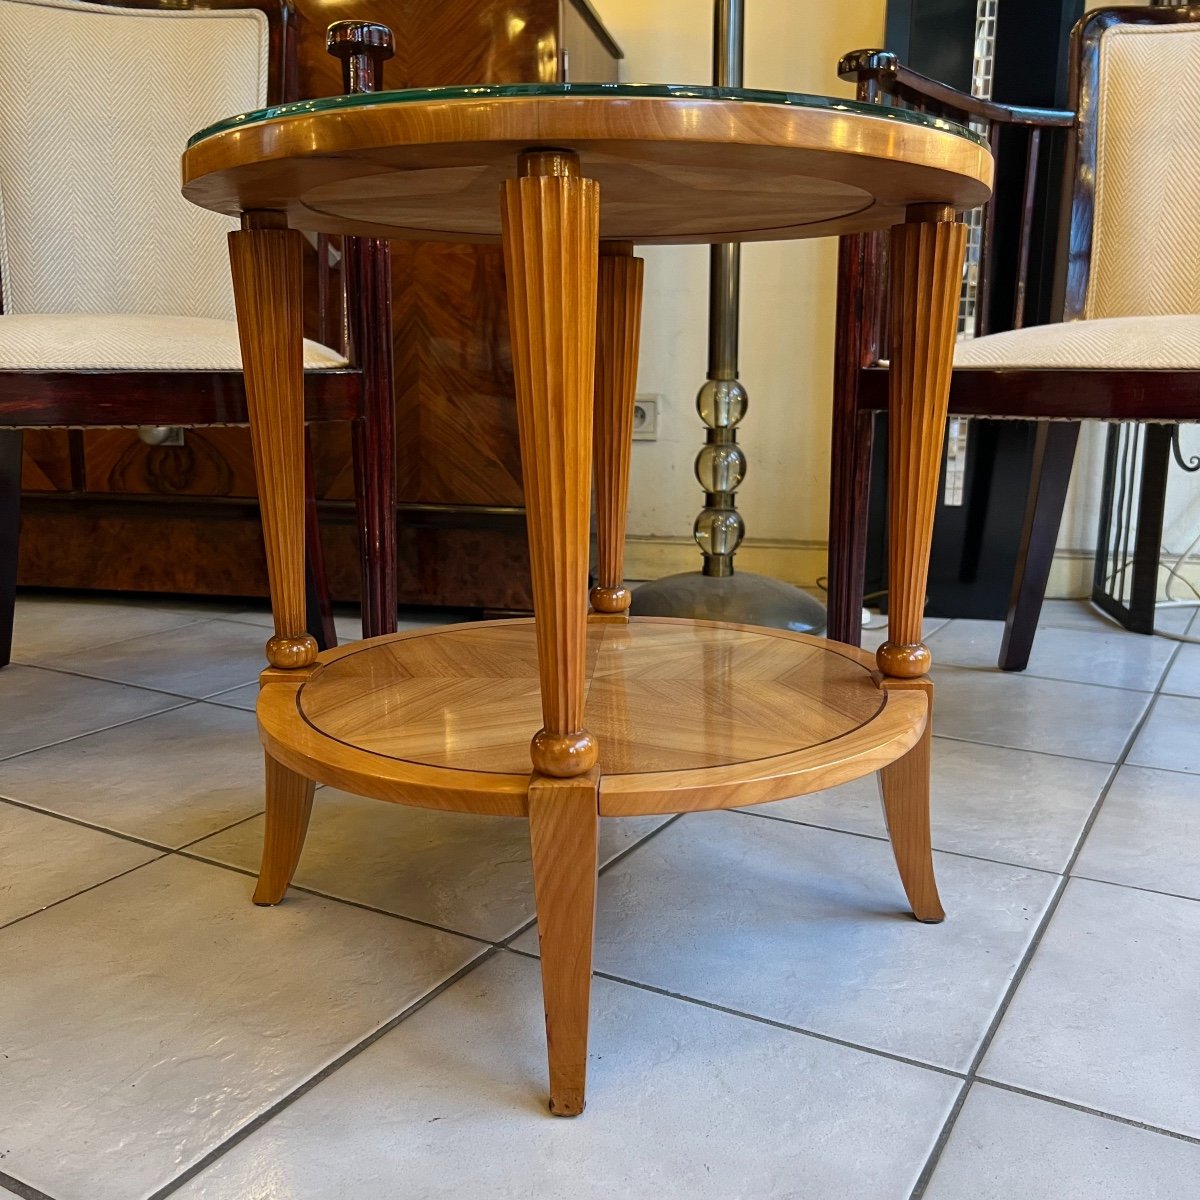 Pedestal Table / Art Deco Round Coffee Table In Cherry (art Deco Table 1930)-photo-5